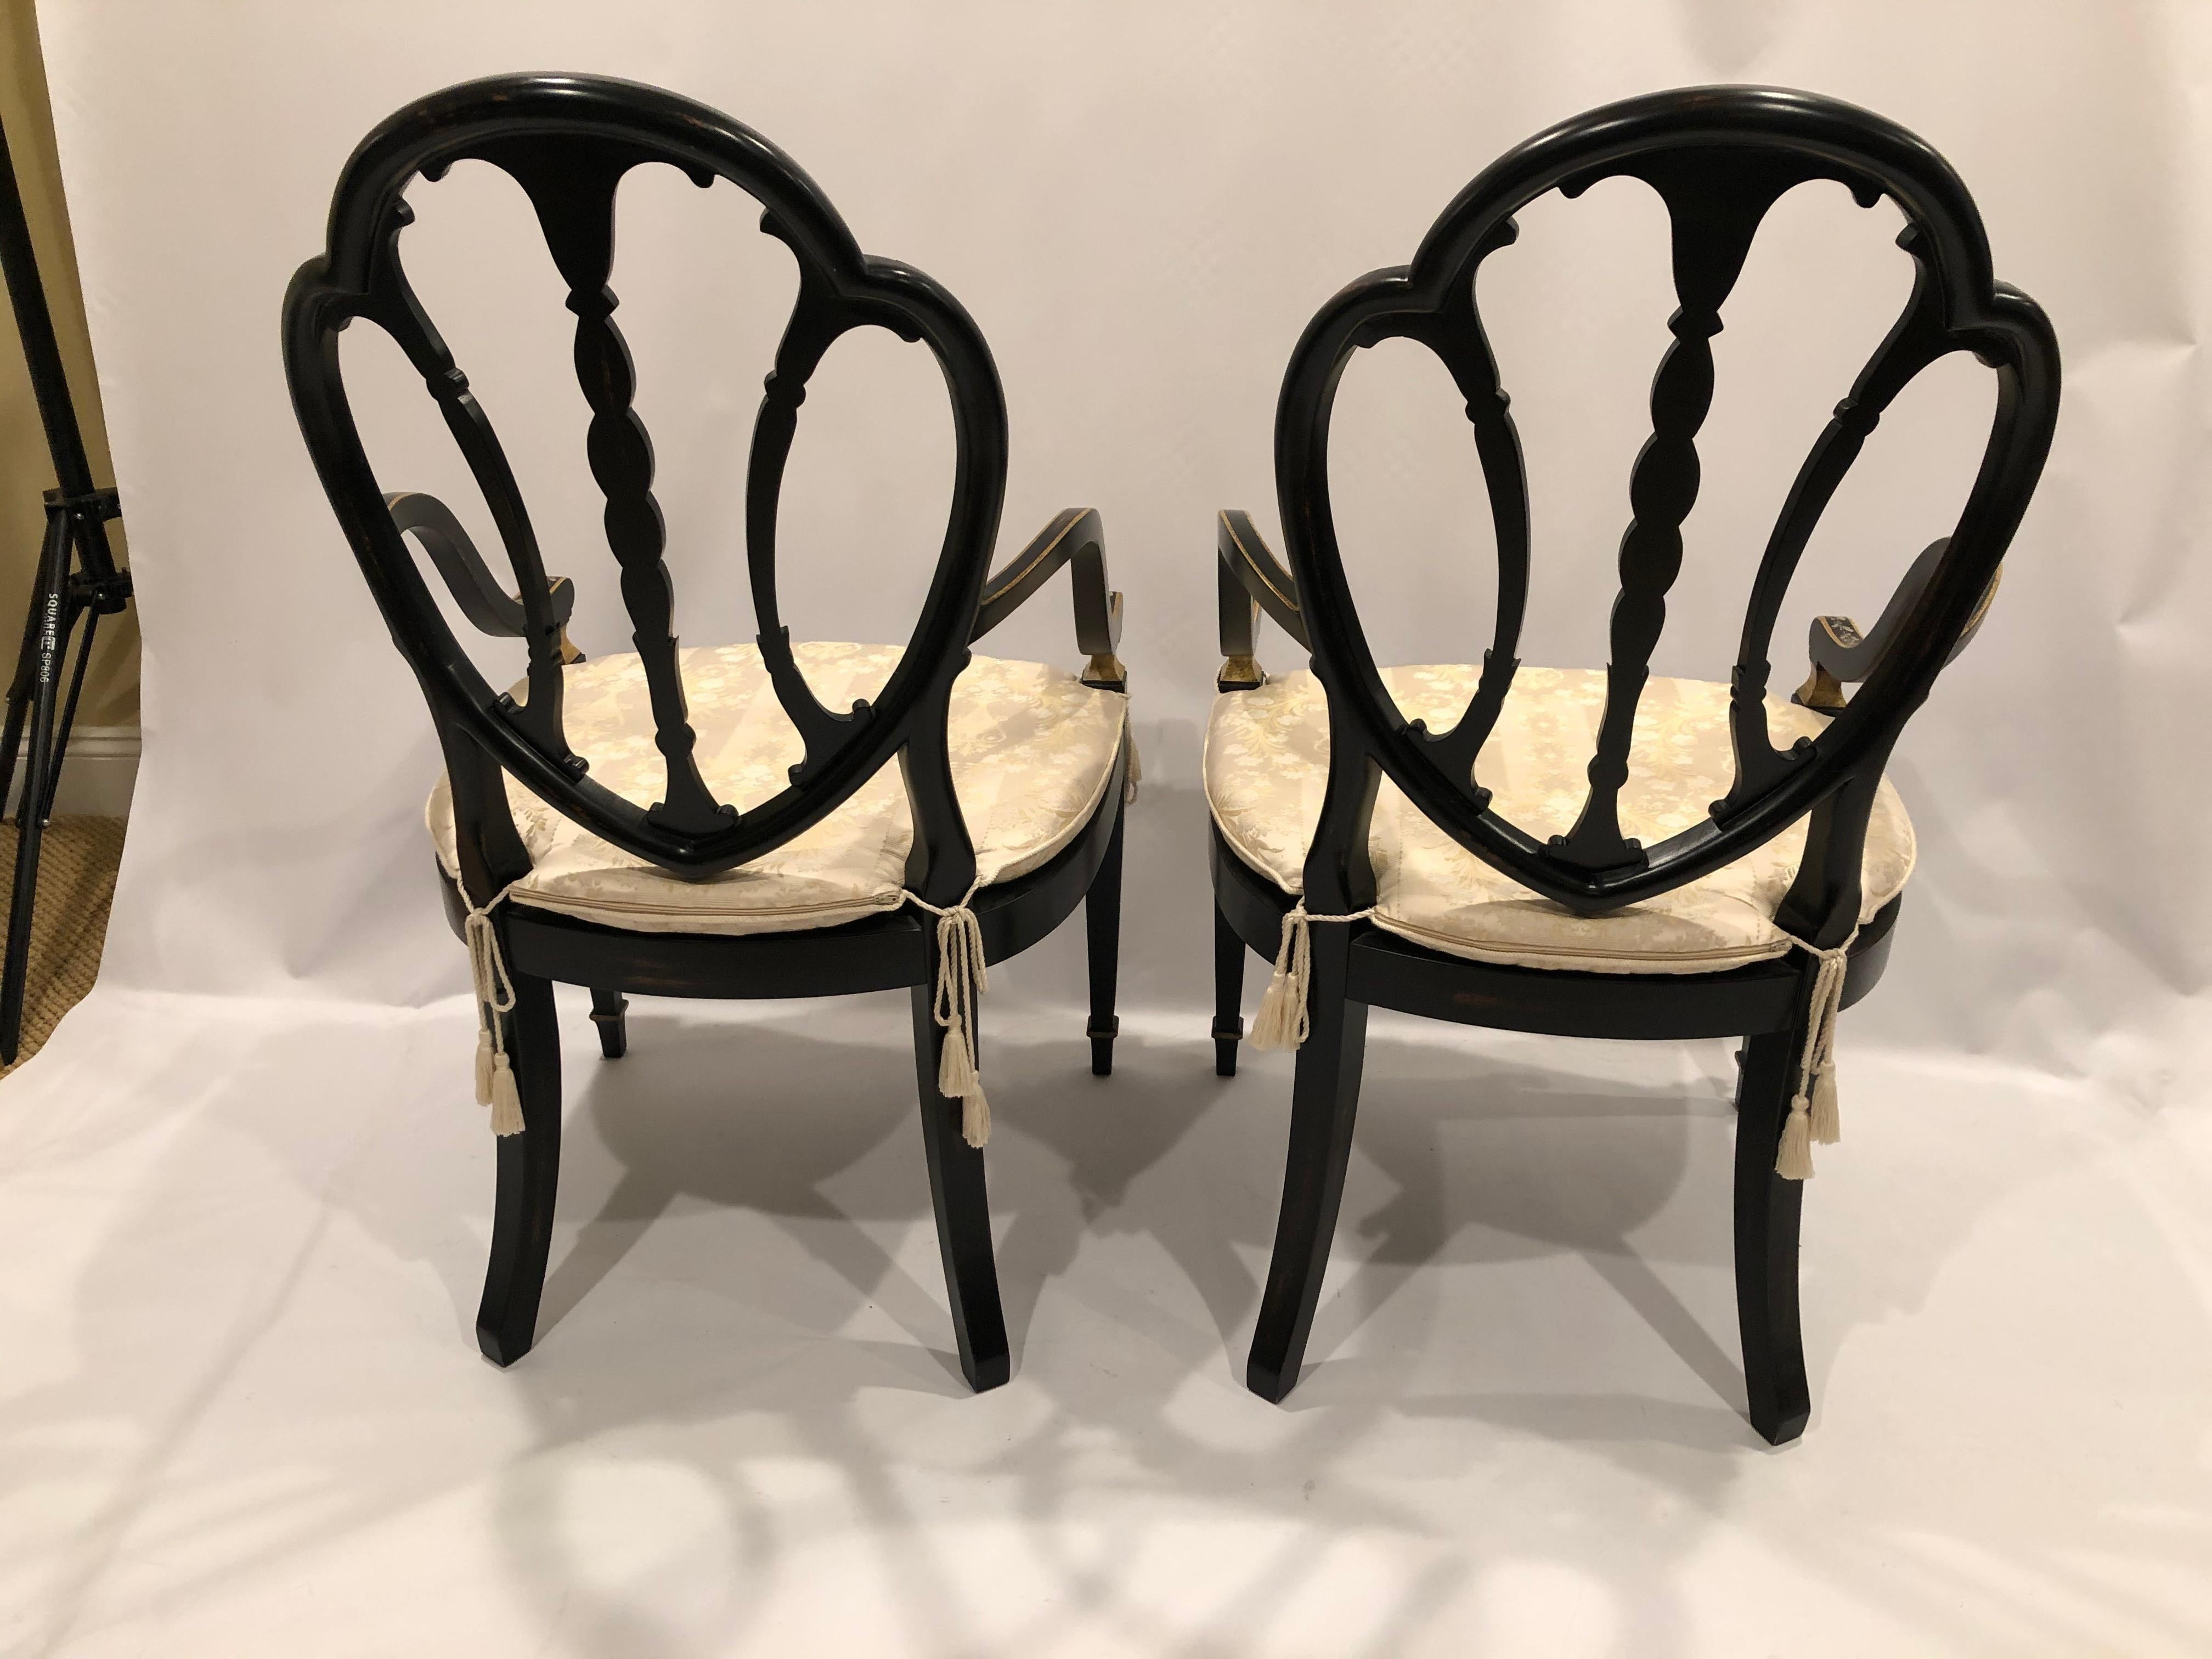 Magnificent Pair of Black Hand Painted Italian Armchairs with Caned Seats For Sale 8